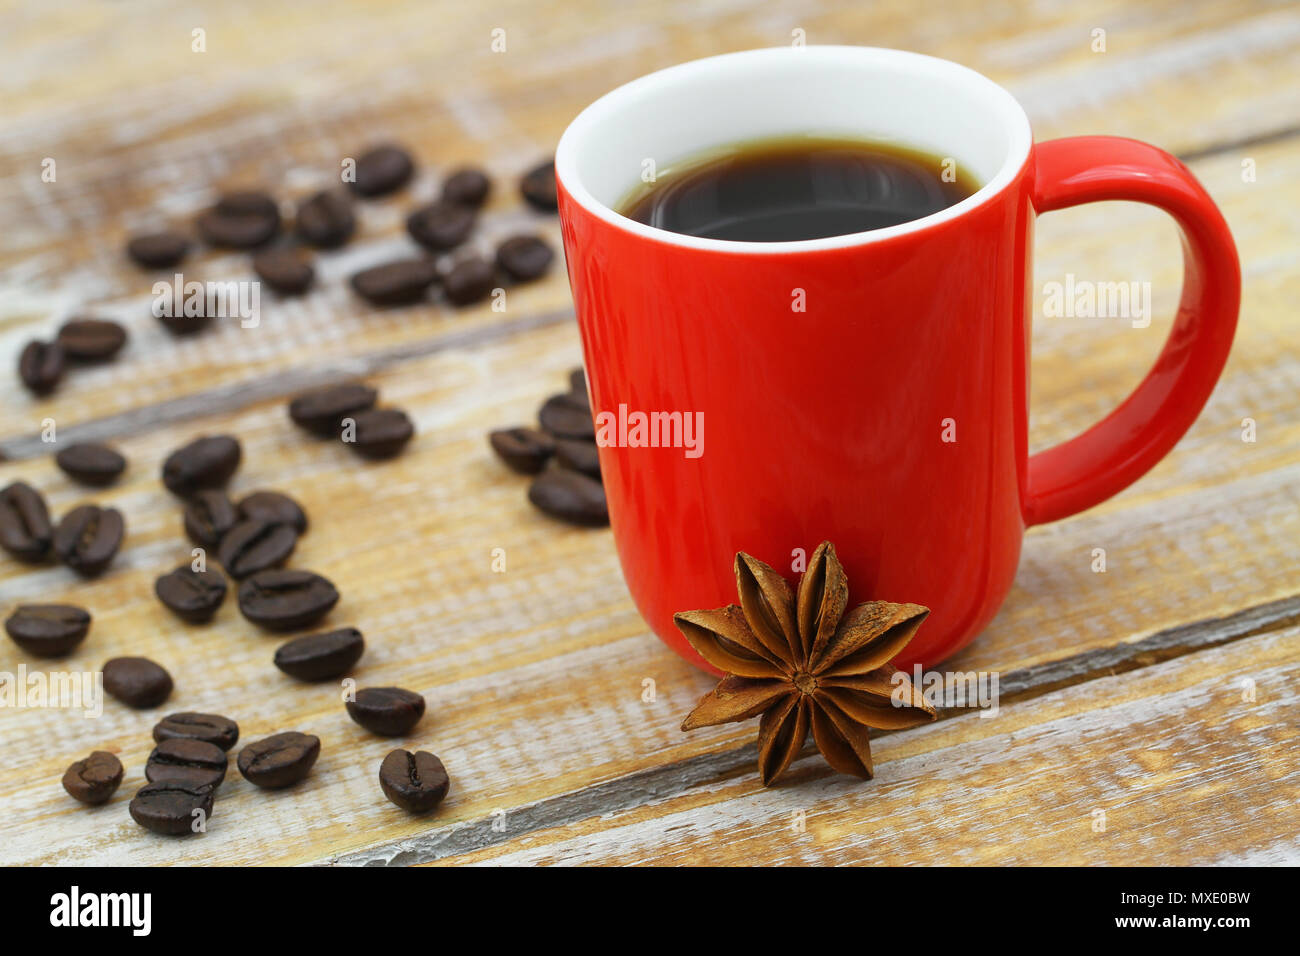 Star anise leaning against red mug of coffee on rustic wooden surface Stock Photo